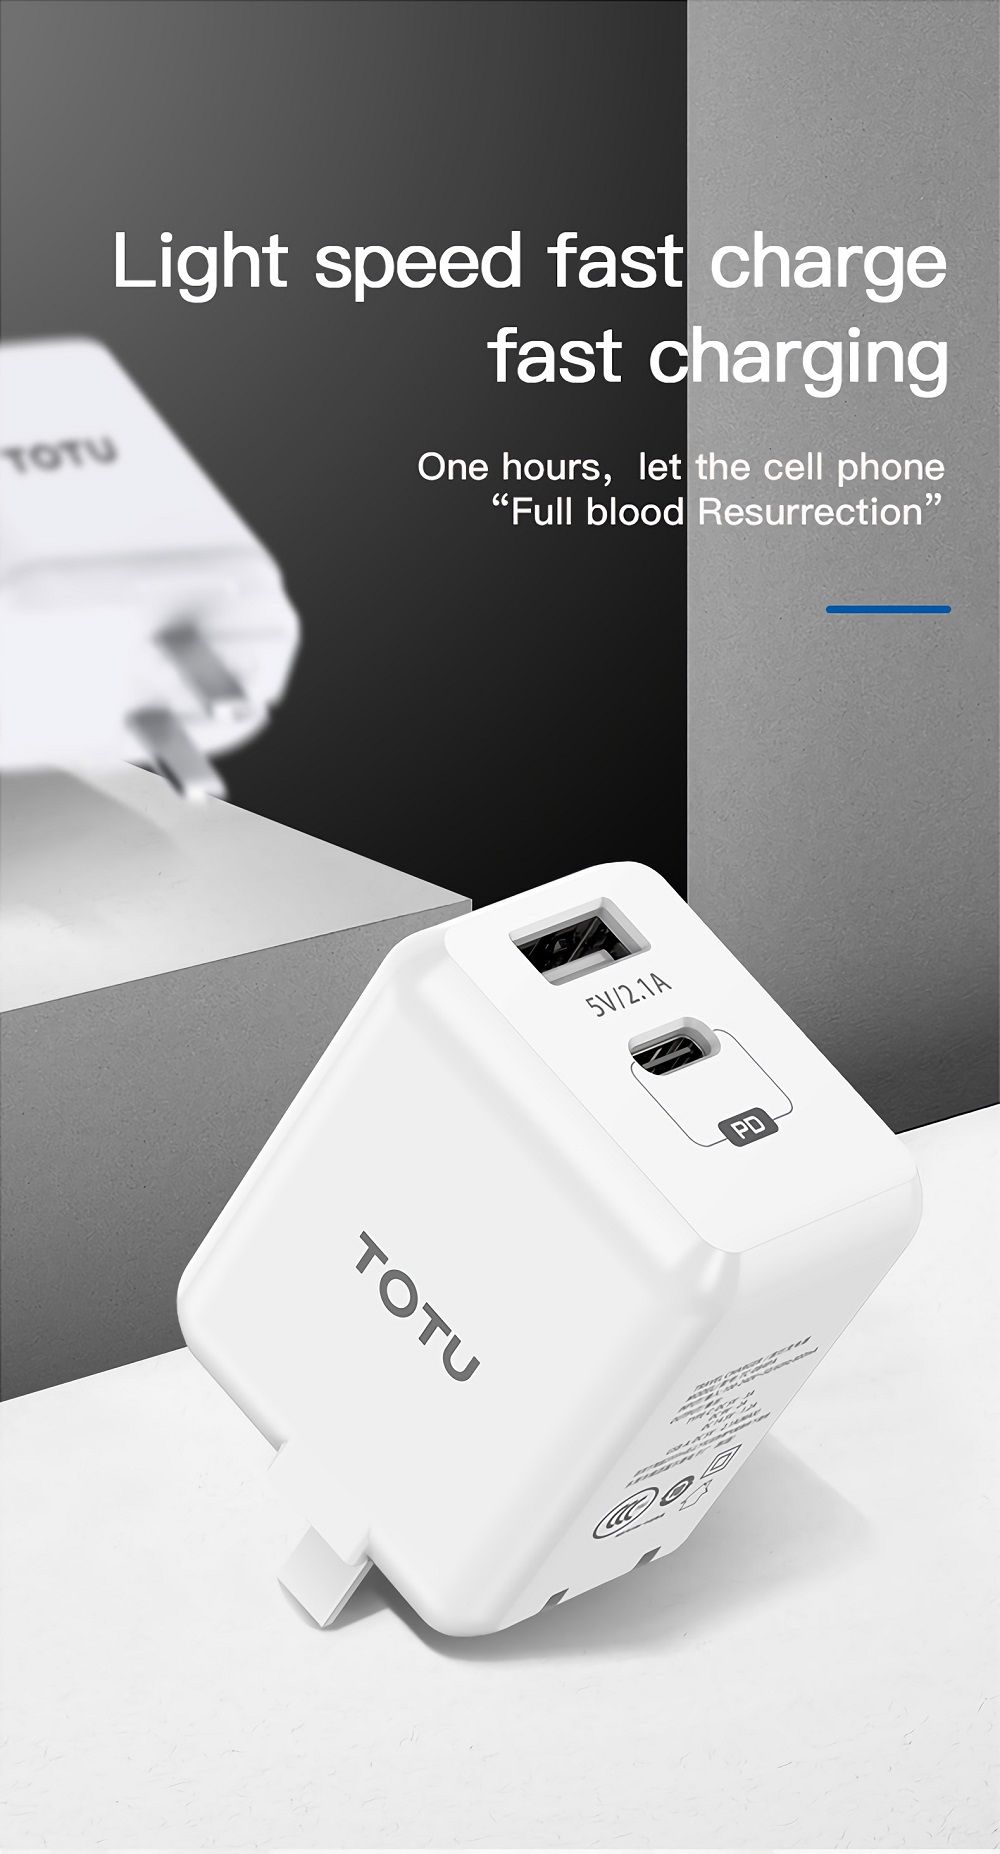 TOTU-TC-084PA-USB-21A-Type-C-PD-Charging-Power-Adapter-Travel--Charger-for-Tablet-Smartphone-1676022